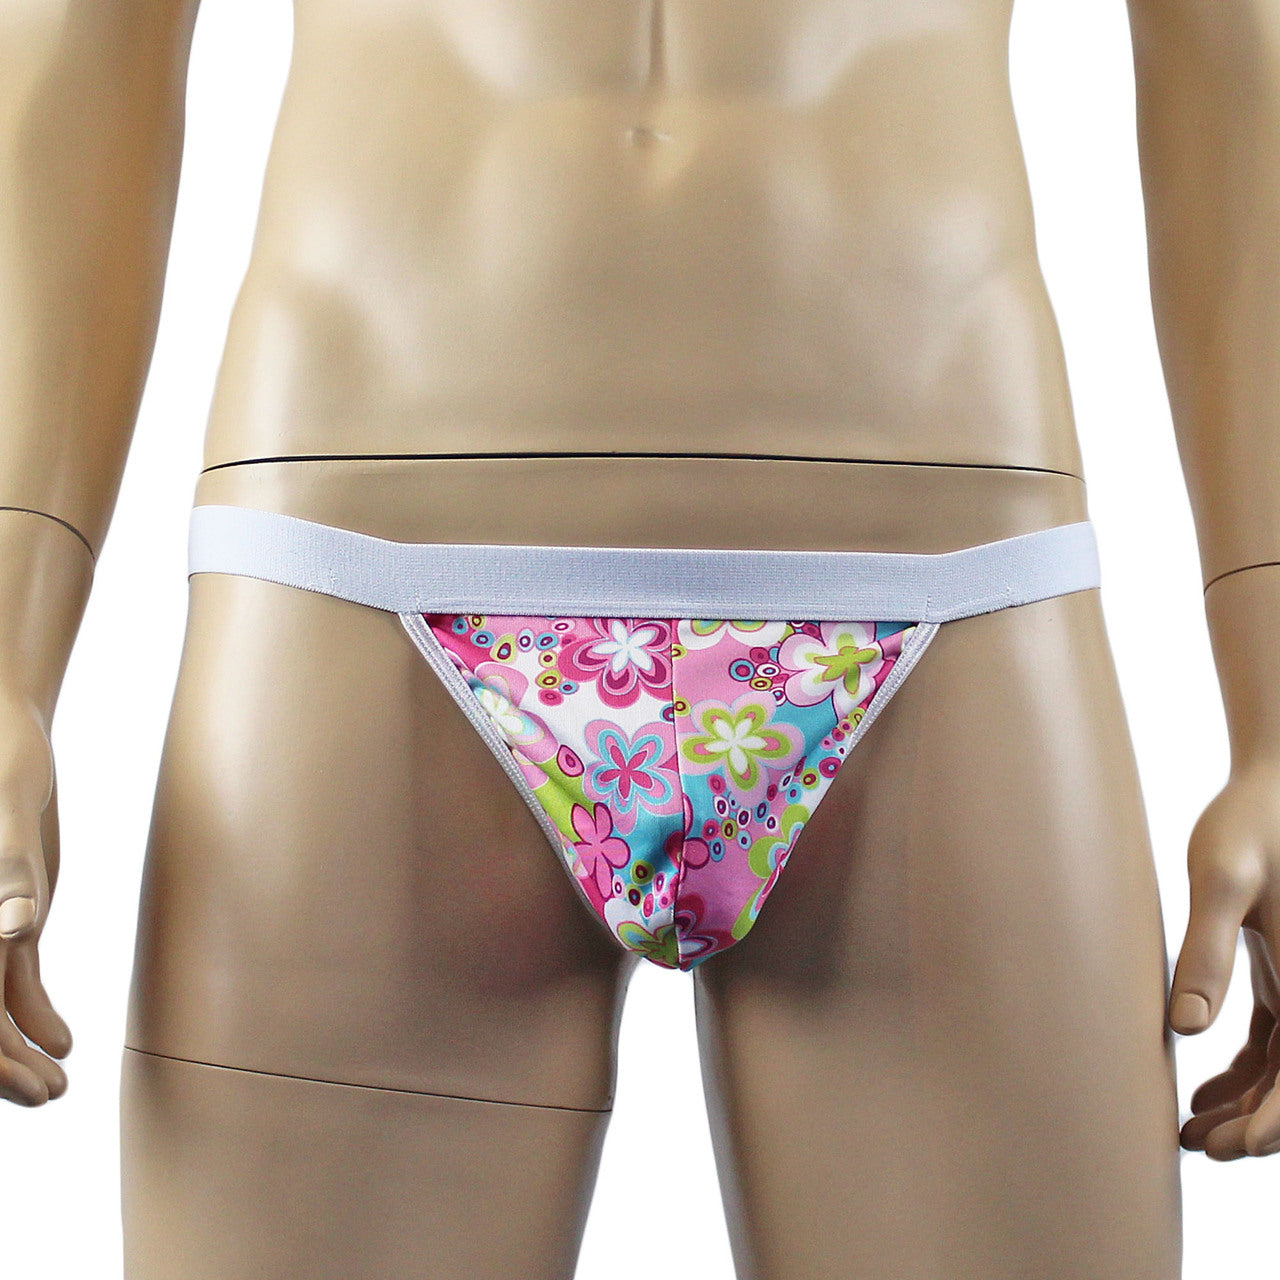 Male Hippie Flower Print Bra Top and Matching G string